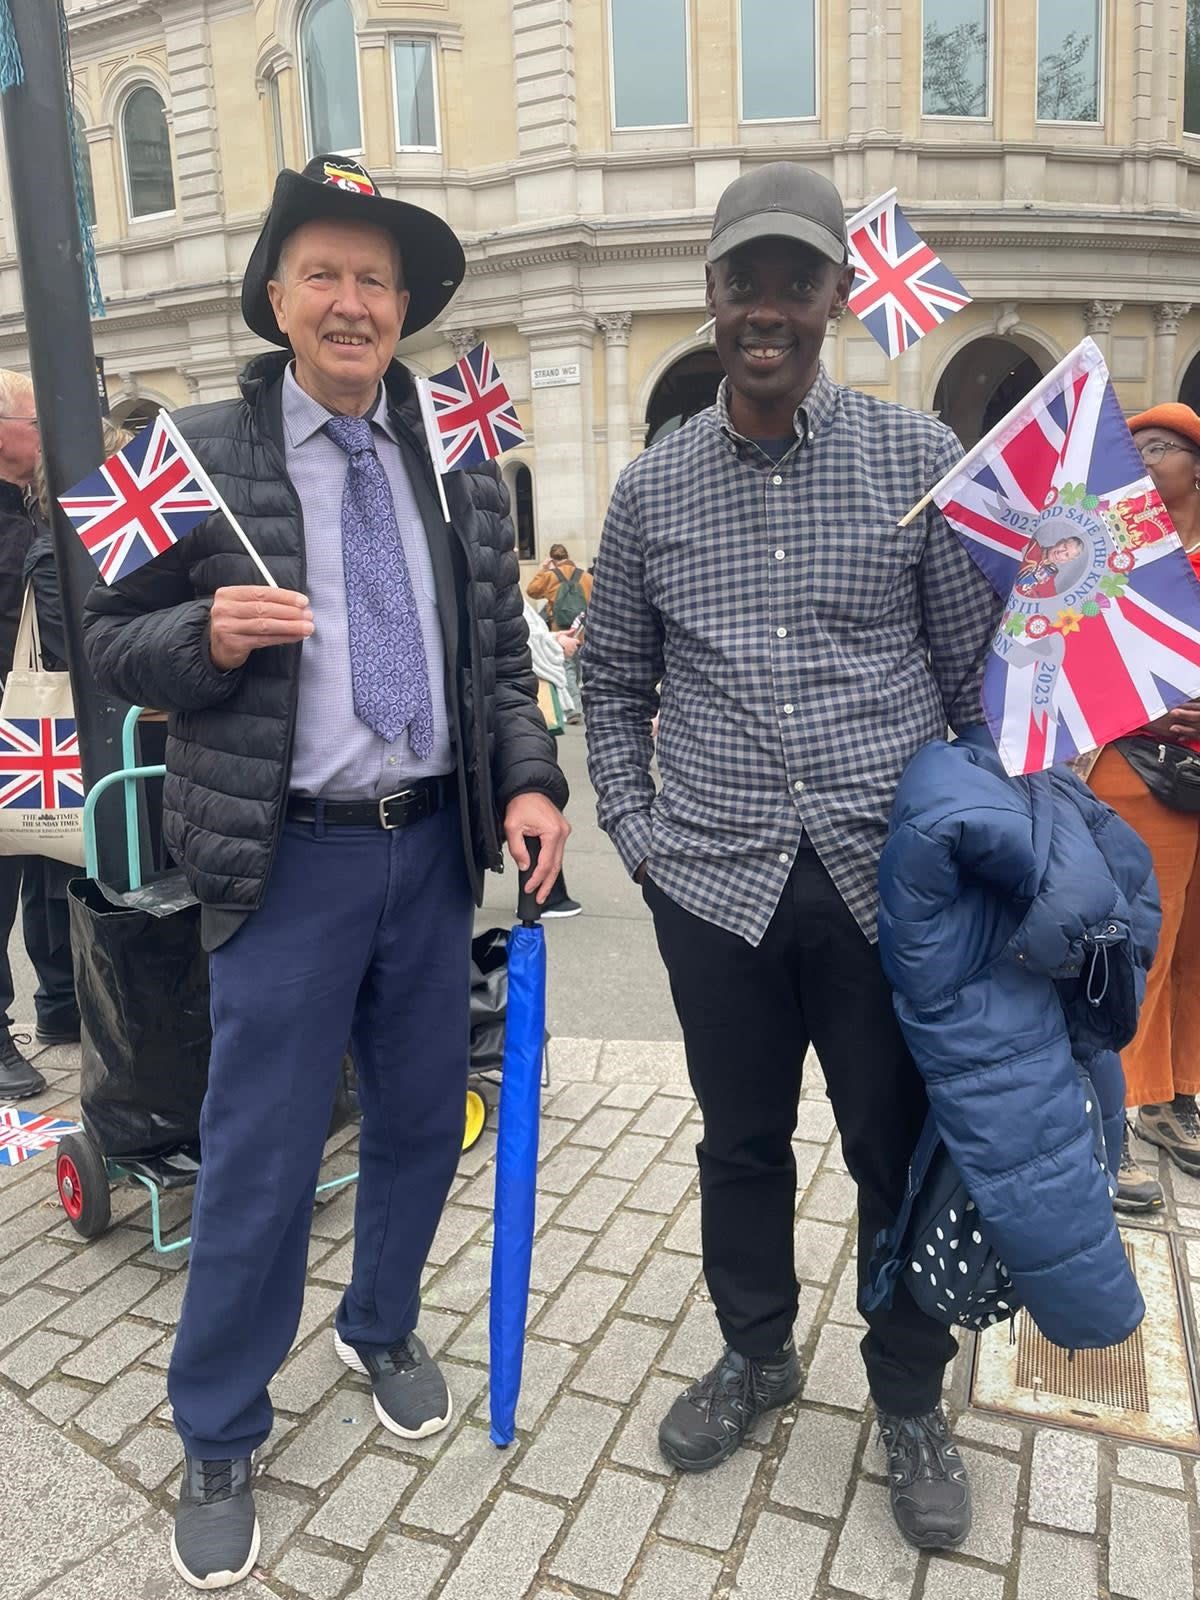 Noel Nuwe (right) flew in from Uganda to celebrate the coronation (The Independent)